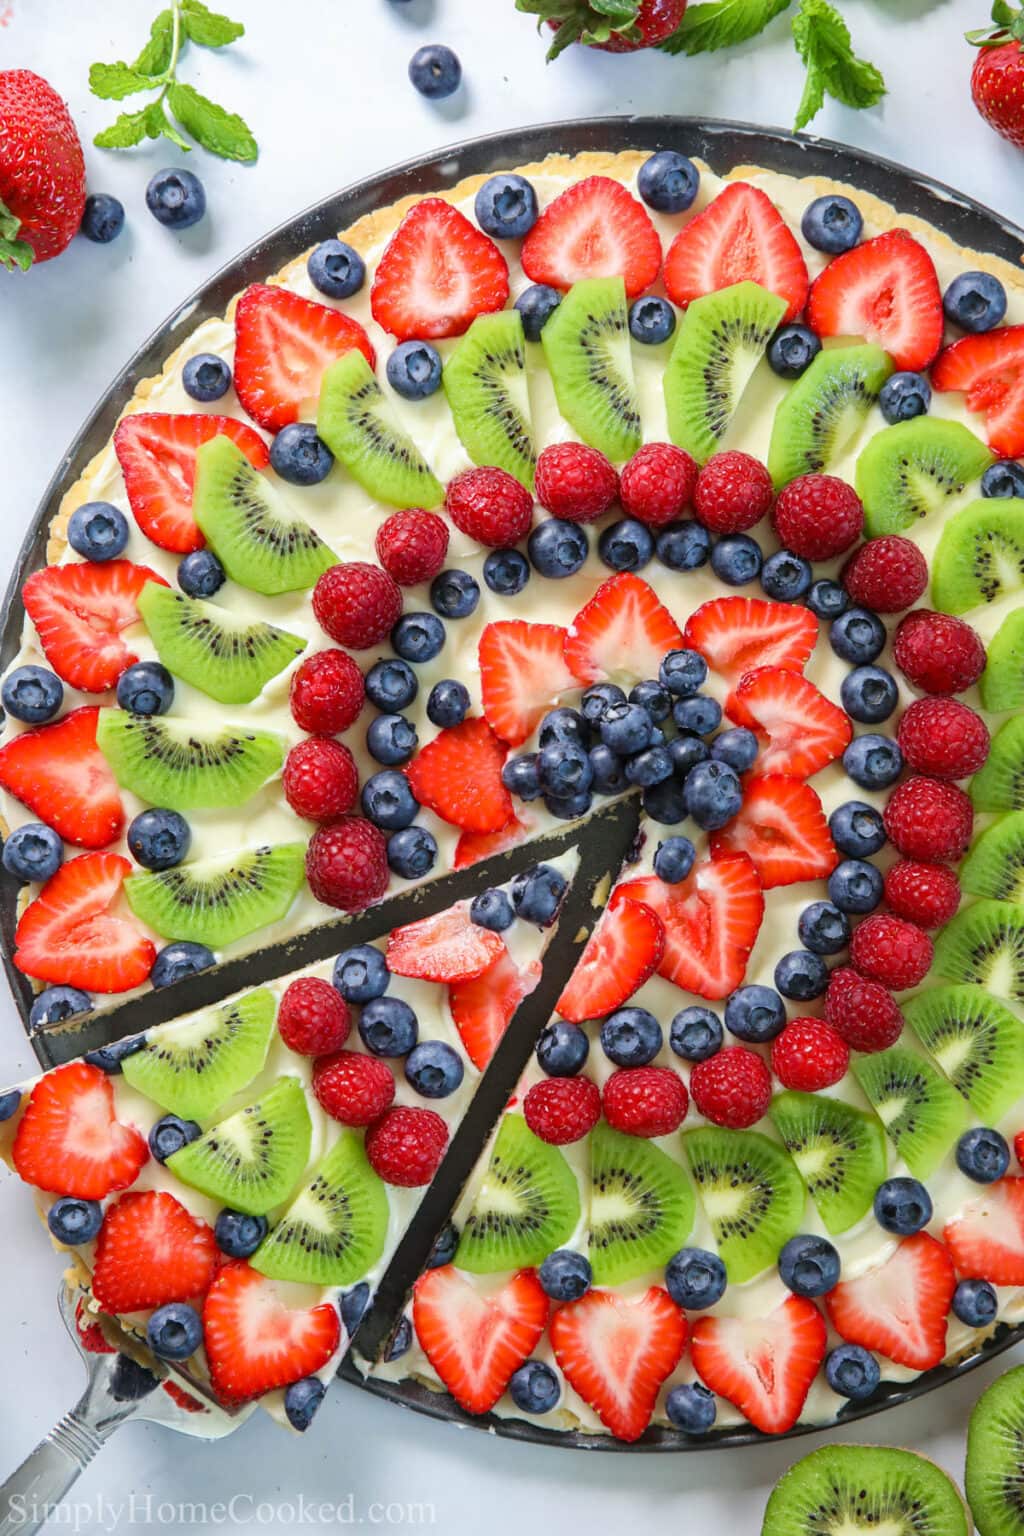 Fruit Pizza Recipe (VIDEO) - Simply Home Cooked